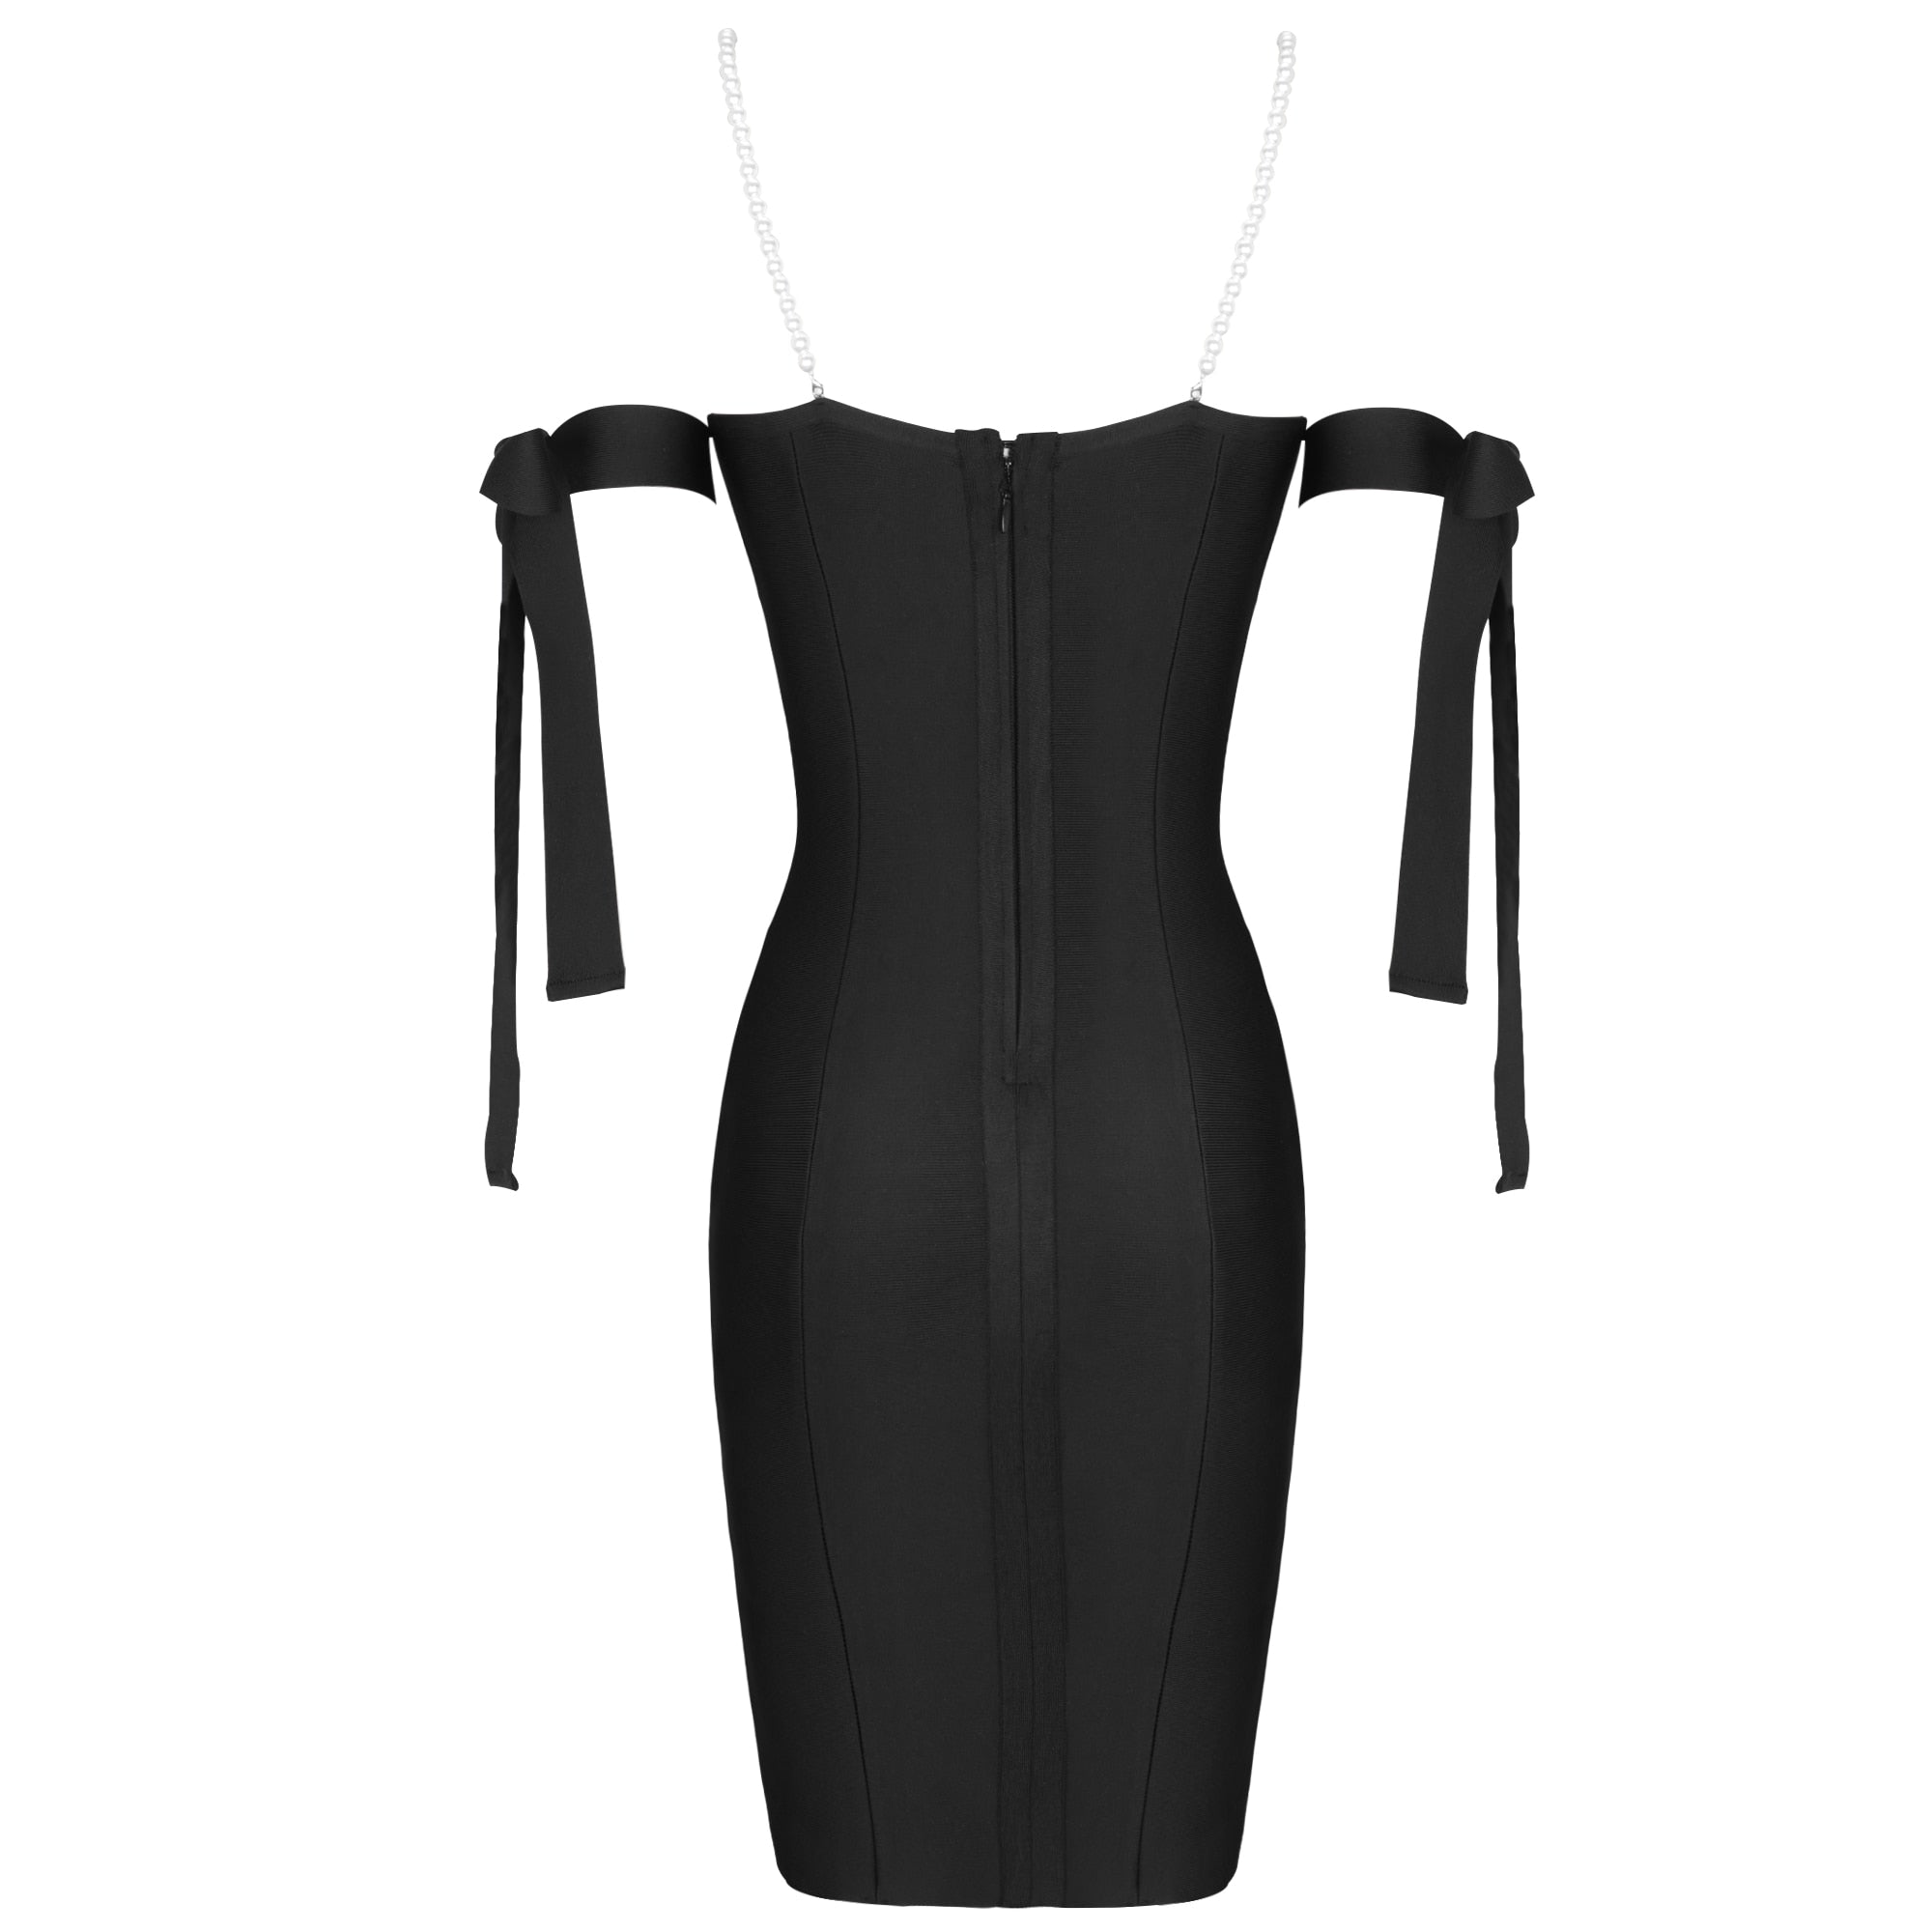 HGM Bandage Dress women's Black Bodycon Dress Ladies Off Shoulder Sexy Club Party Dress evening Outfits